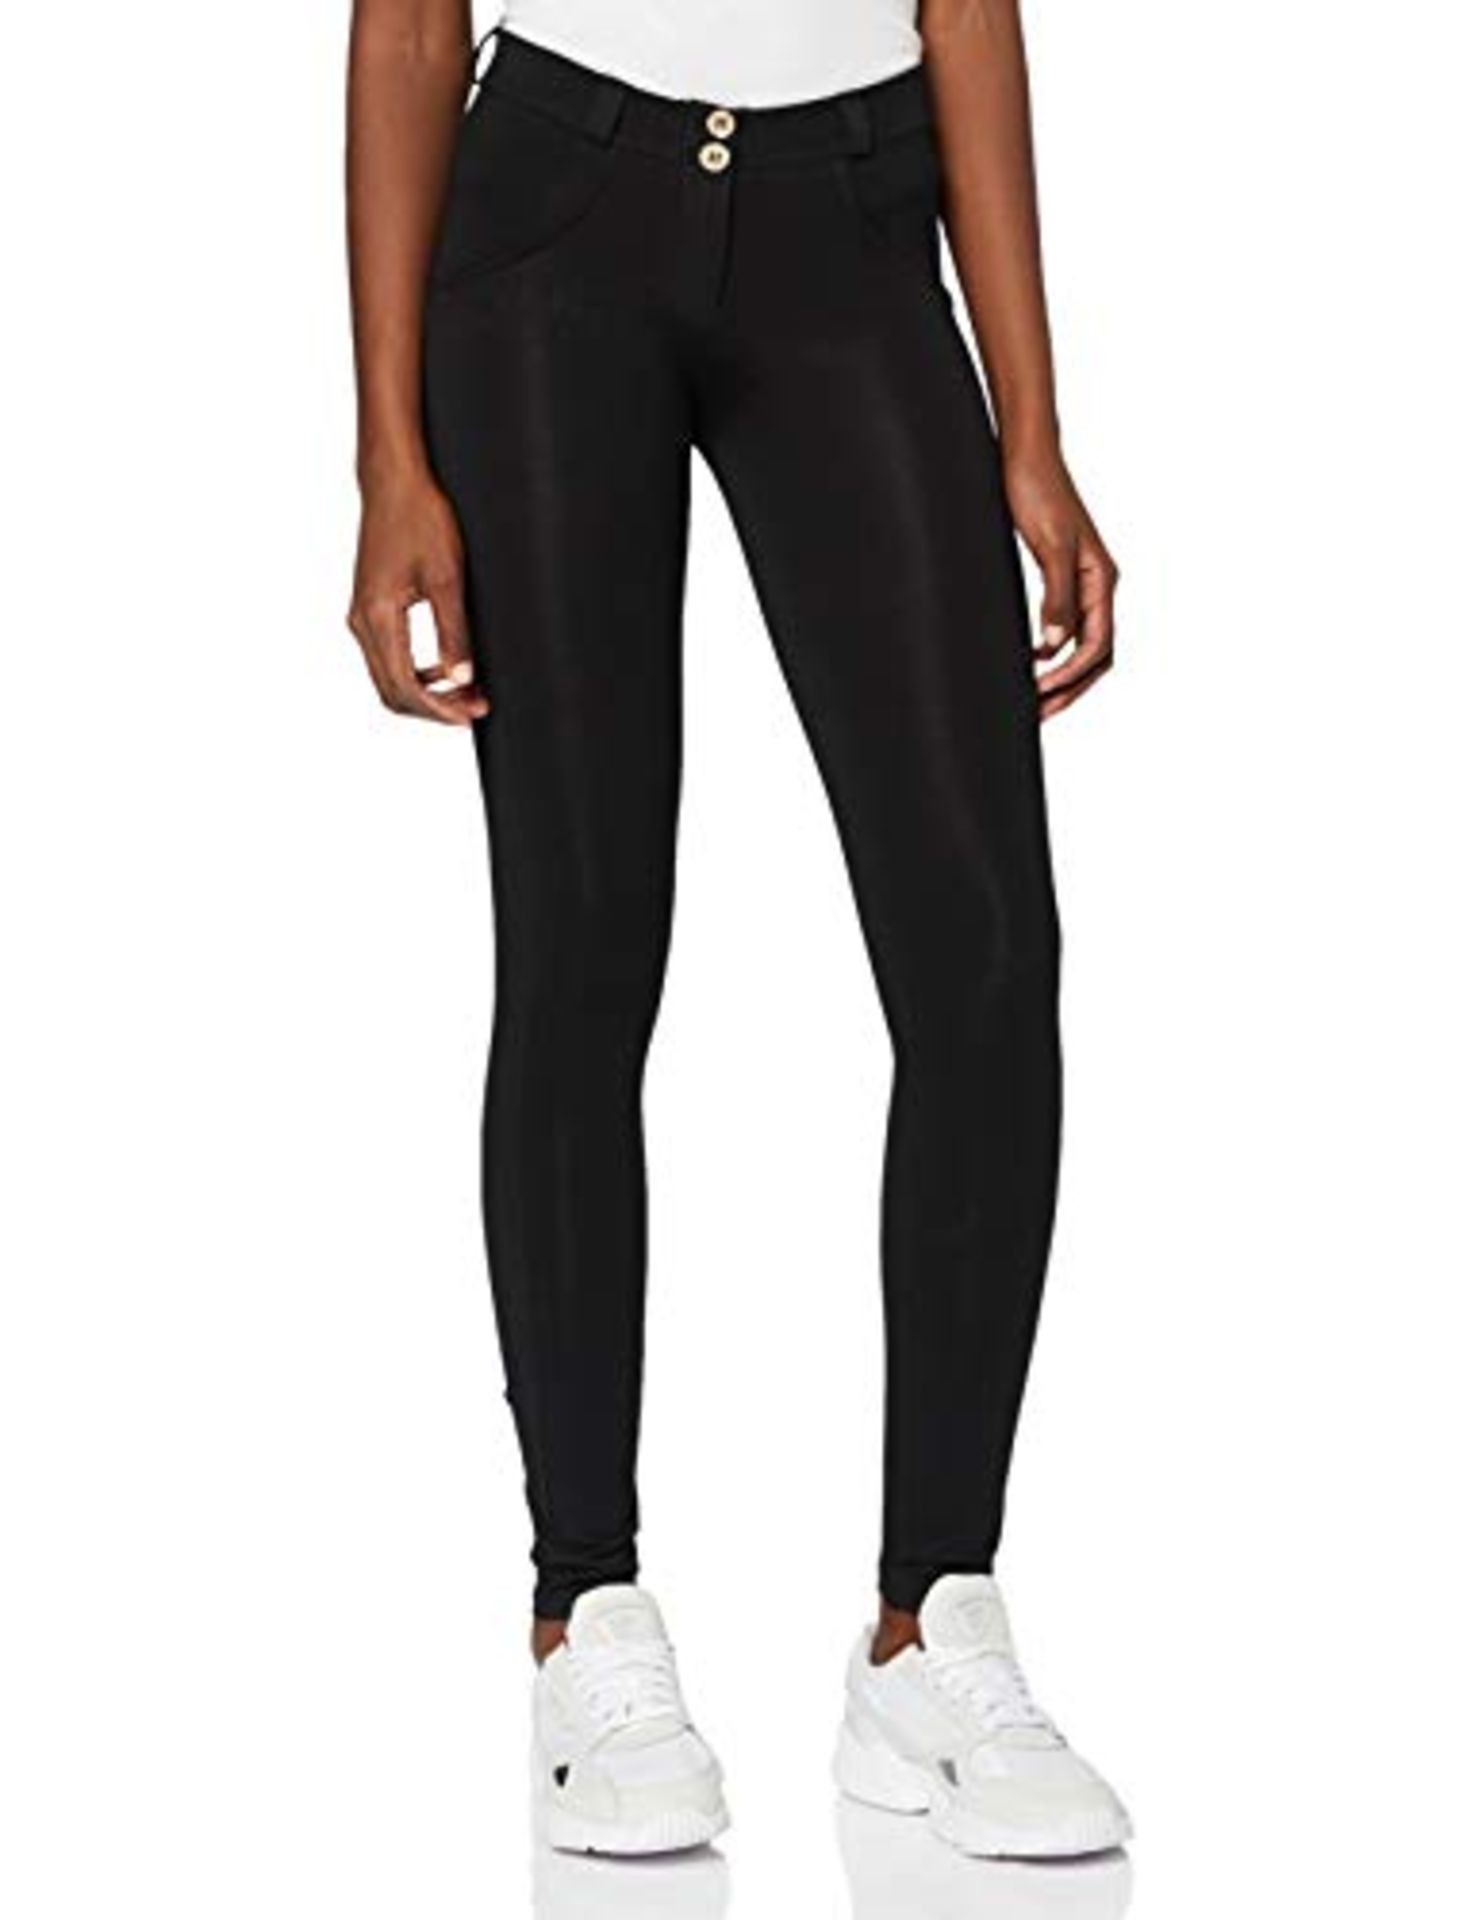 RRP £70.00 Freddy Women's Wrup1rc001 Trousers, Black (Black N0), 40 (Manufacturer Size: Large)